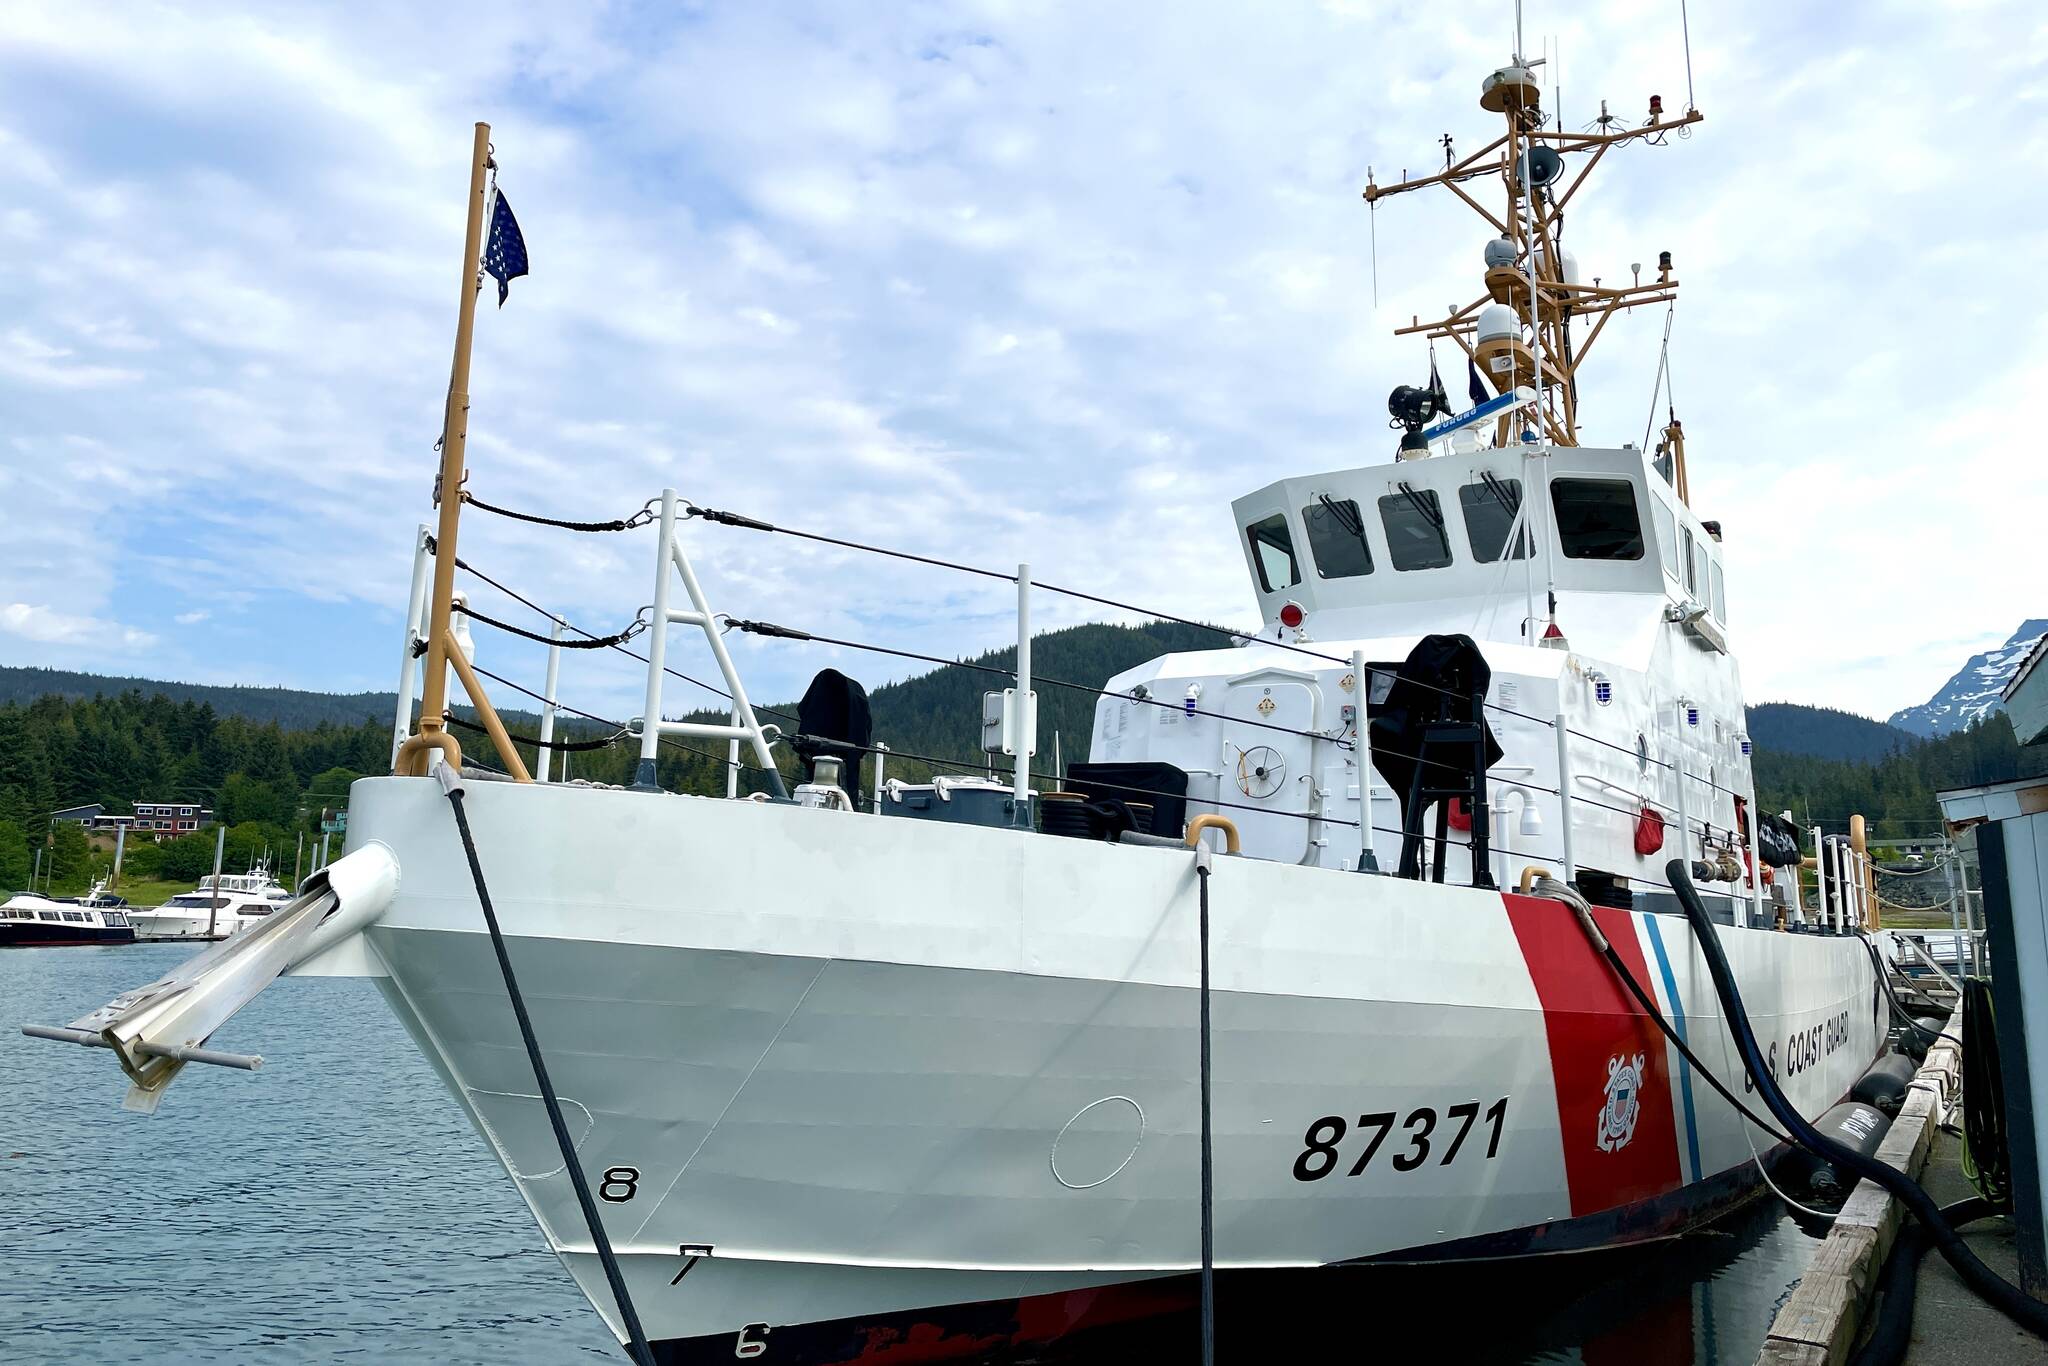 The U.S. Coast Guard Cutter Reef Shark replaced the USCGC Liberty as the cutter for Sector Juneau earlier in June, stationed at Don D. Statter Harbor. (Michael S. Lockett / Juneau Empire)